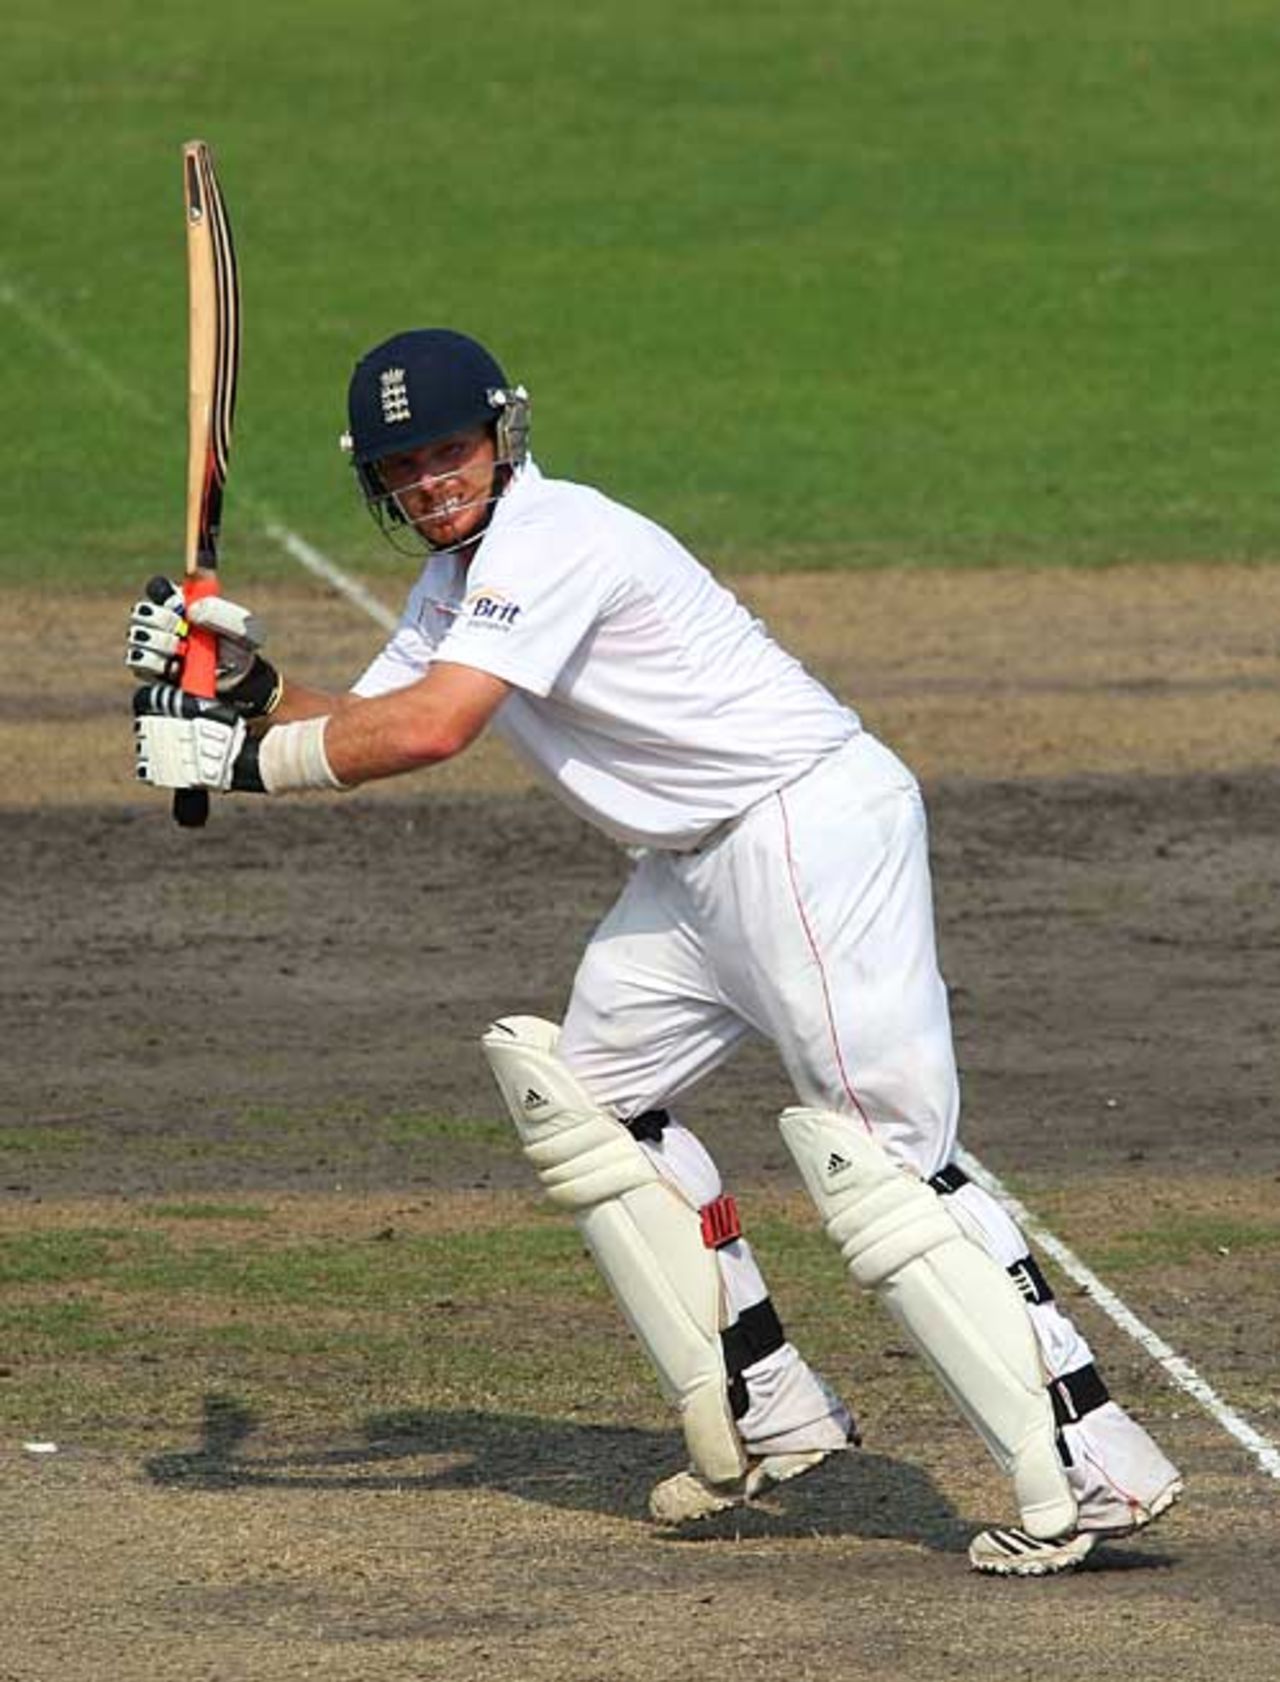 Ian Bell played compactly and confidently to register his 10th Test hundred, Bangladesh v England, 2nd Test, Dhaka, 3rd day, March 22, 2010